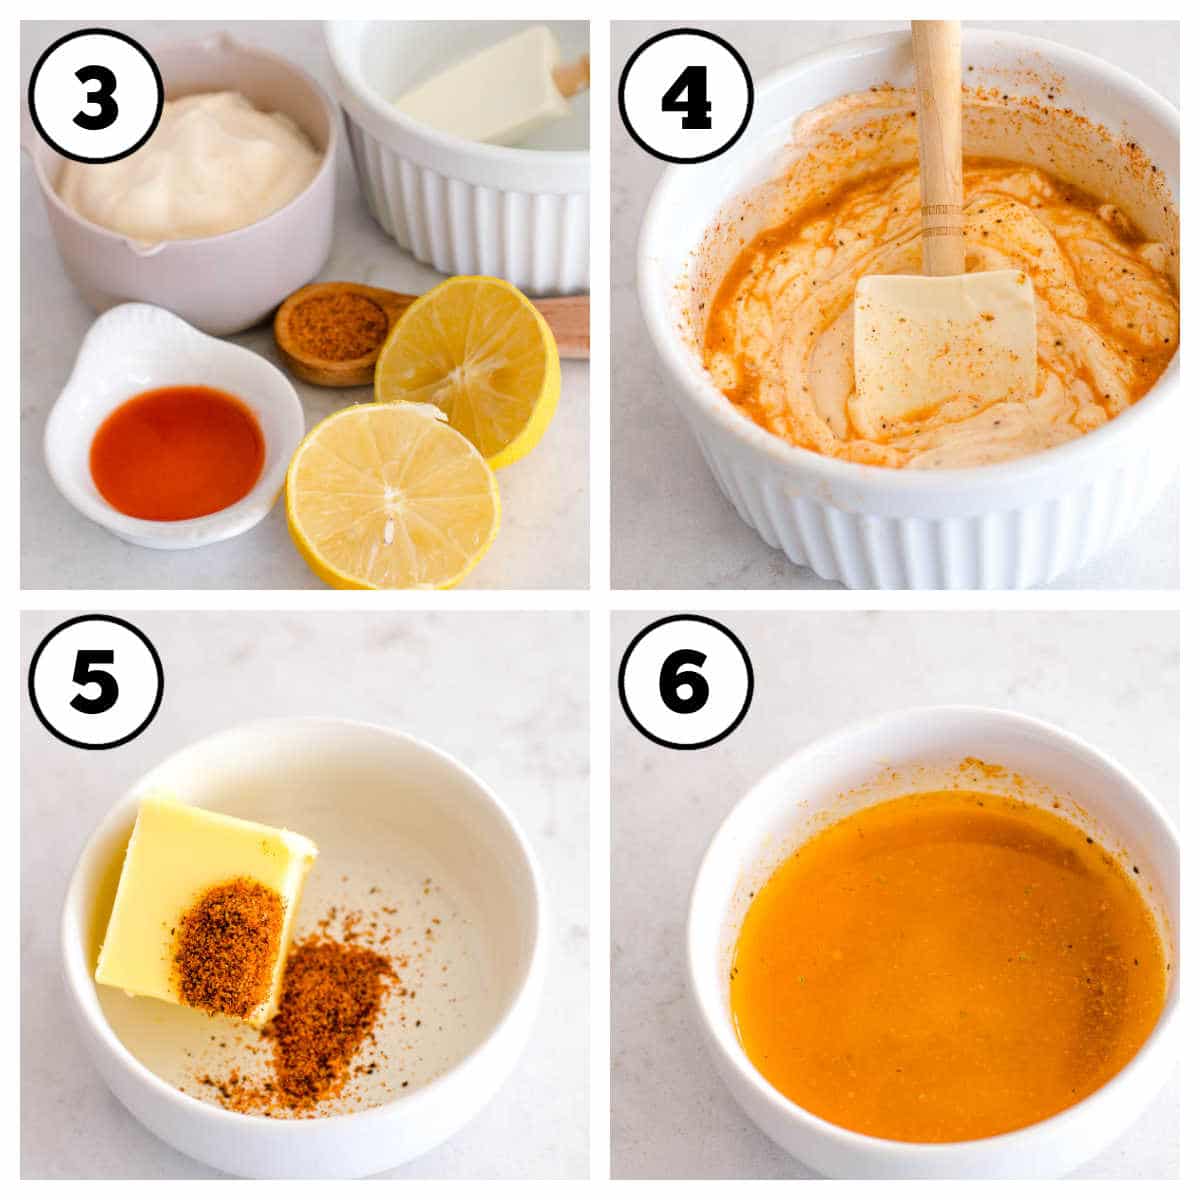 Steps 3-6 for making sauce and bun glaze for fish sliders.